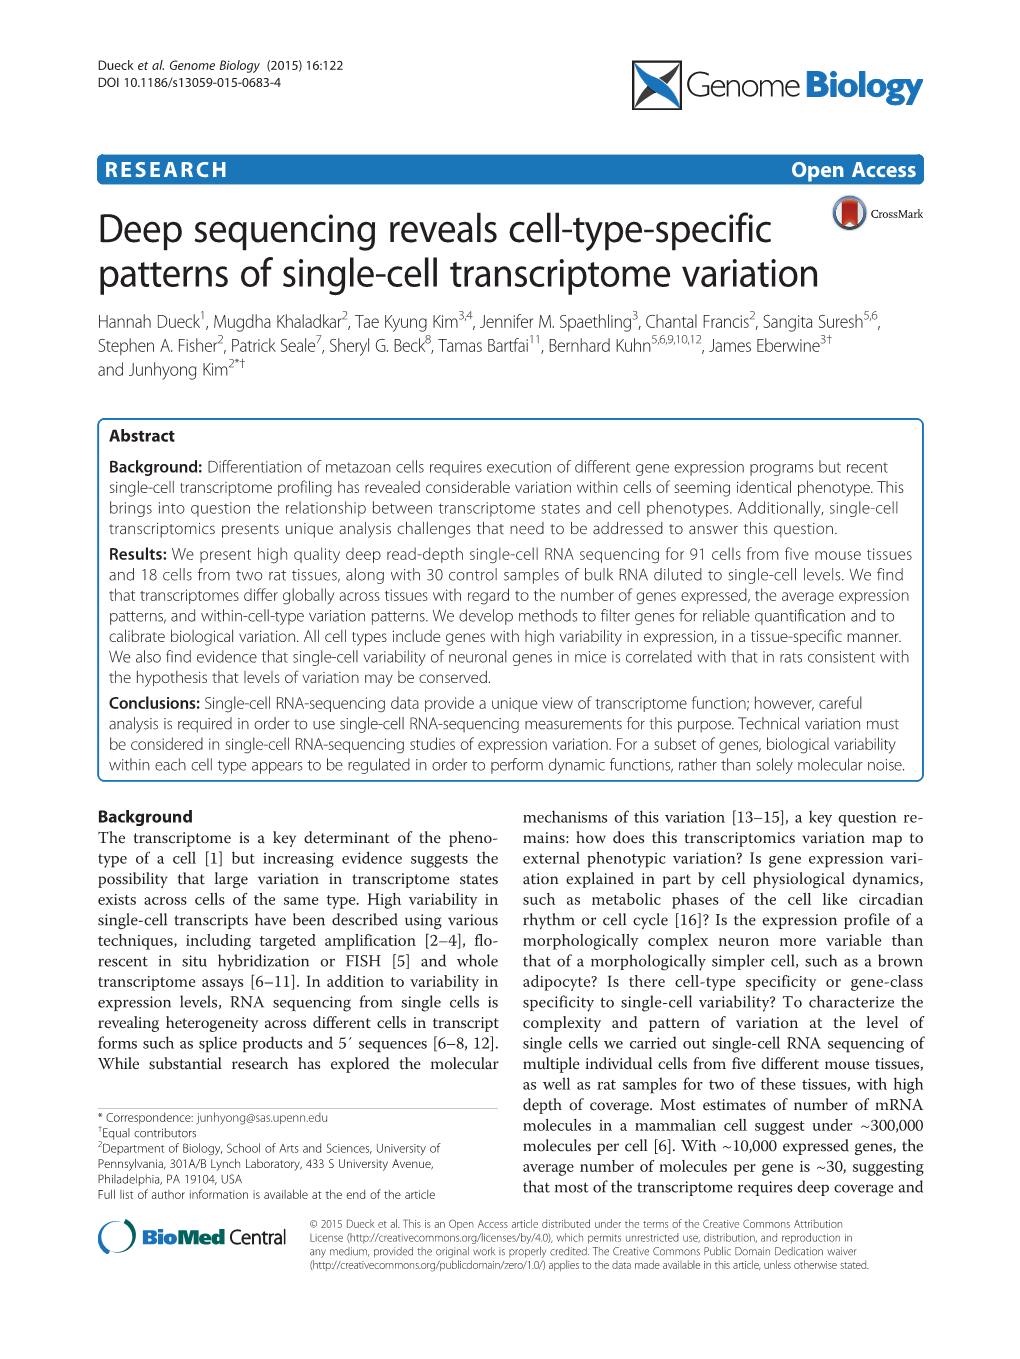 Deep Sequencing Reveals Cell-Type-Specific